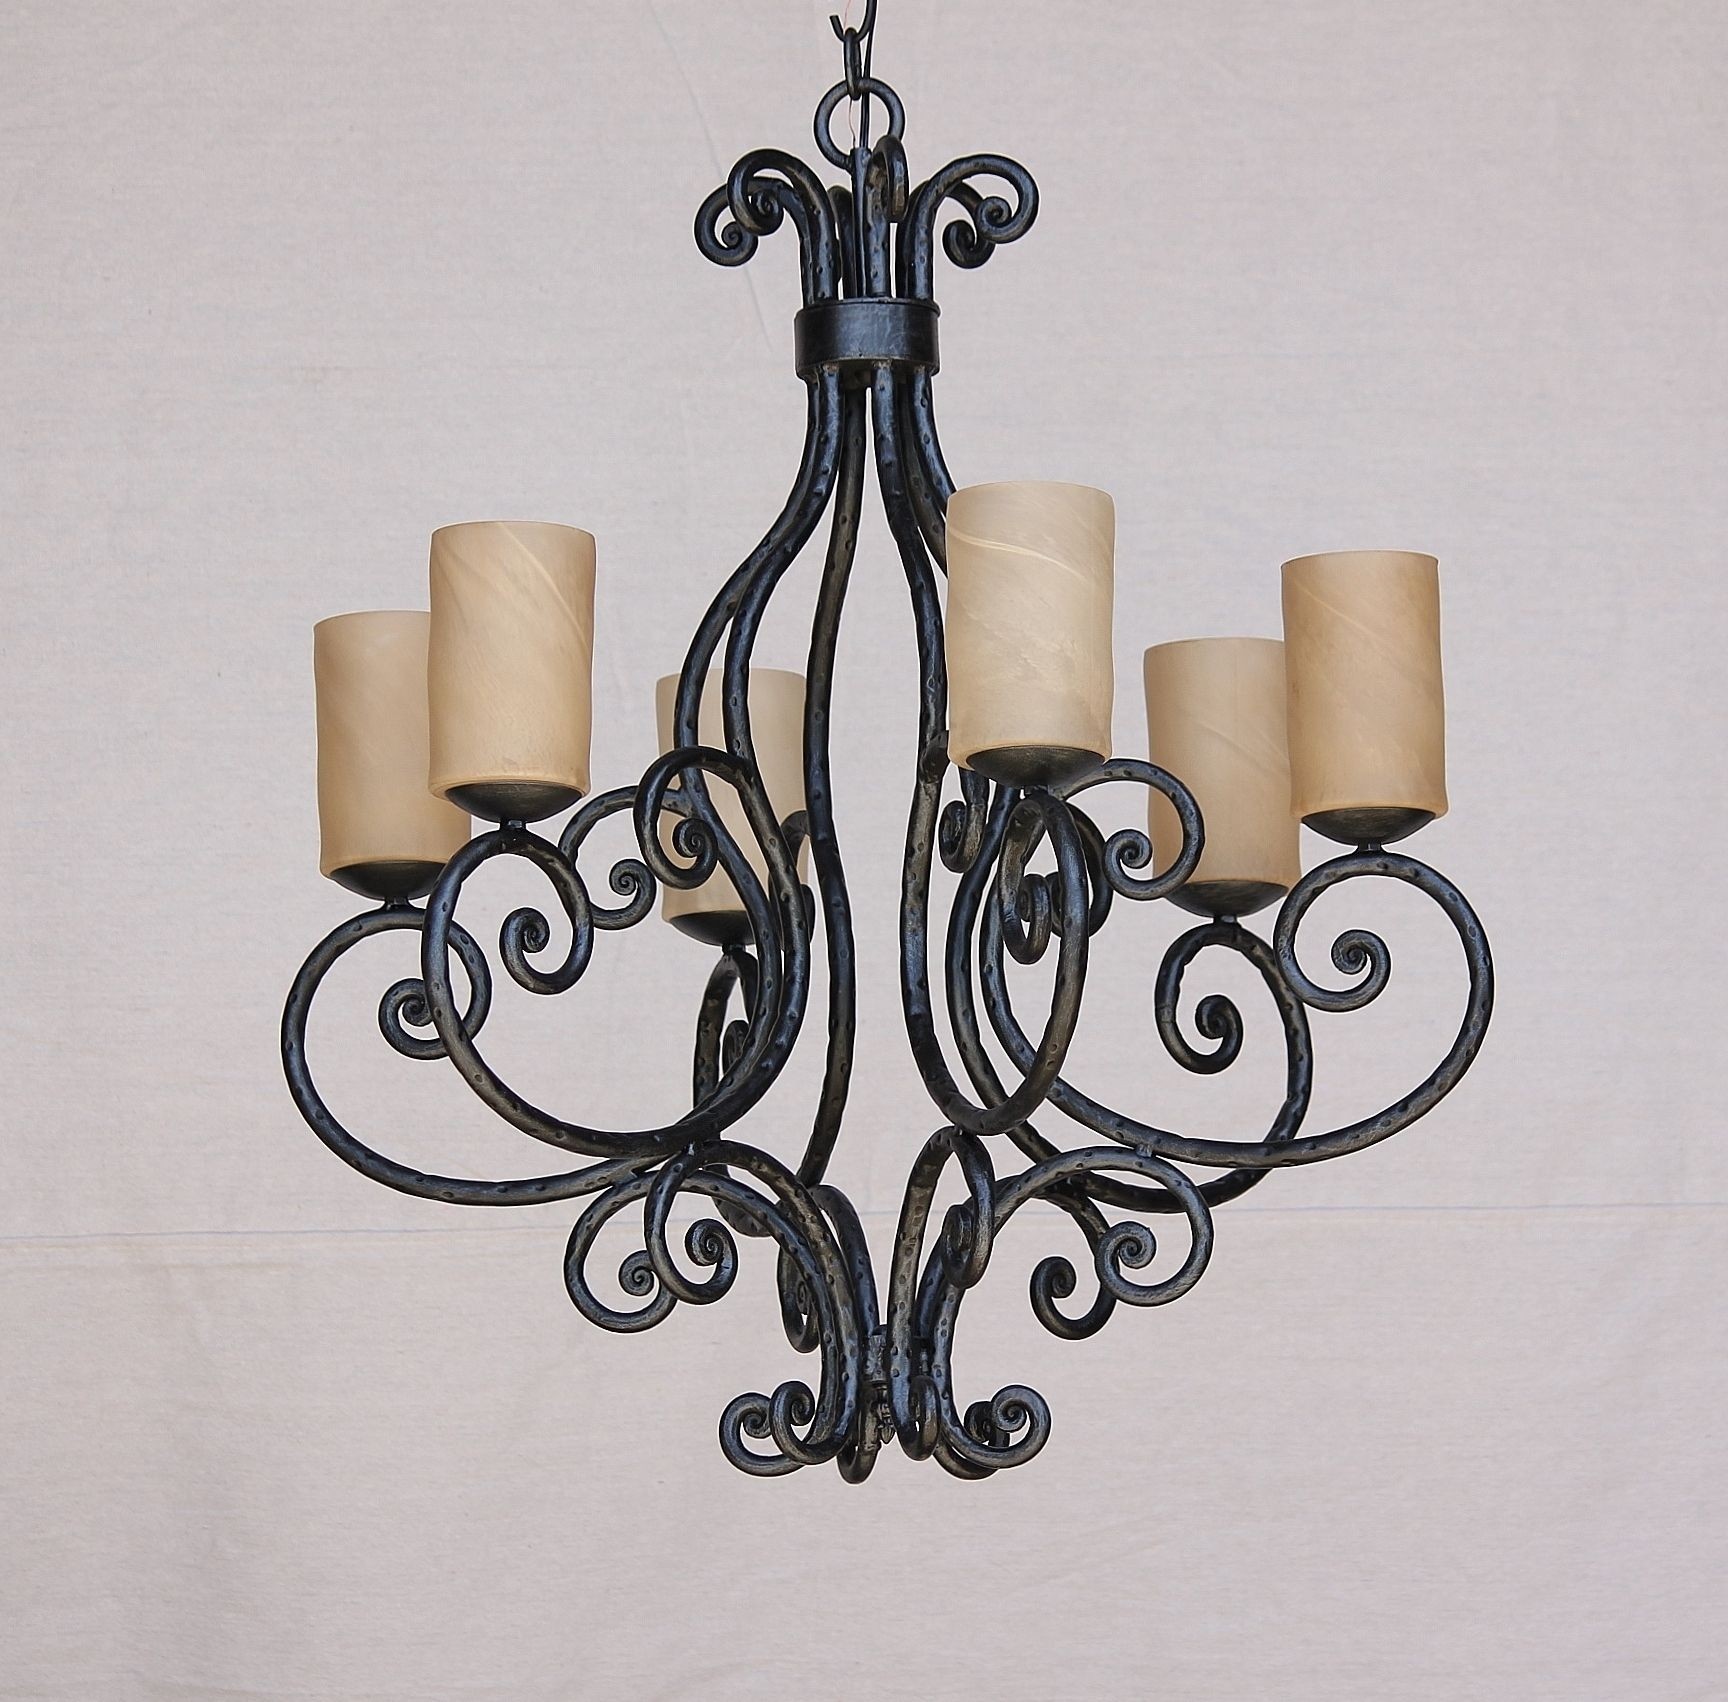 Lights of tuscany 1614 6 rustic tuscan style chandelier